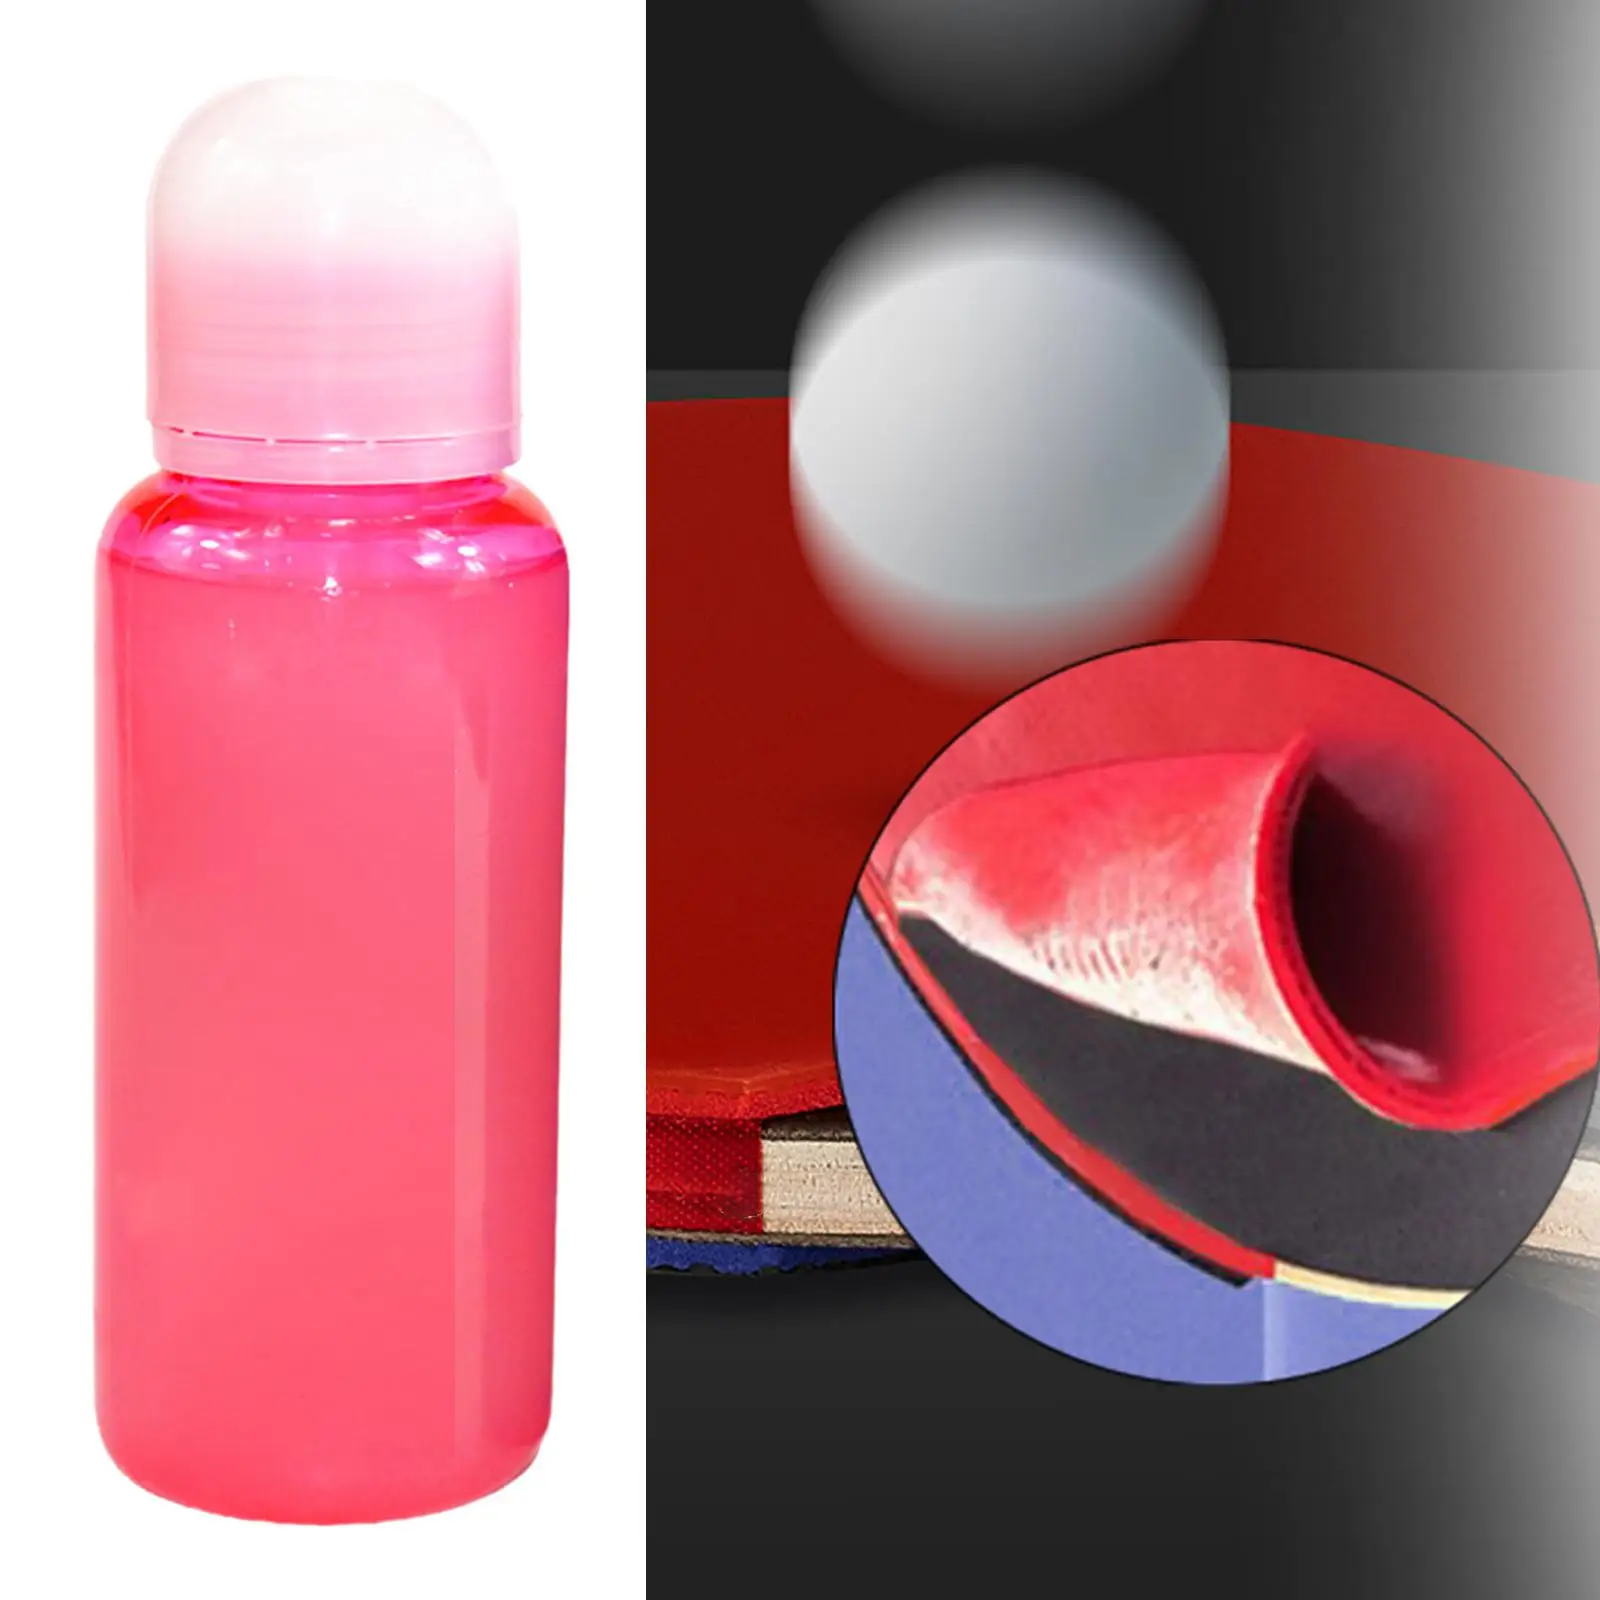 250ml Liquid Glue for Paddle Pingpong Paddles Glue Improve Ball Speeds High Quality with Built-in Brush Table Tennis Glue